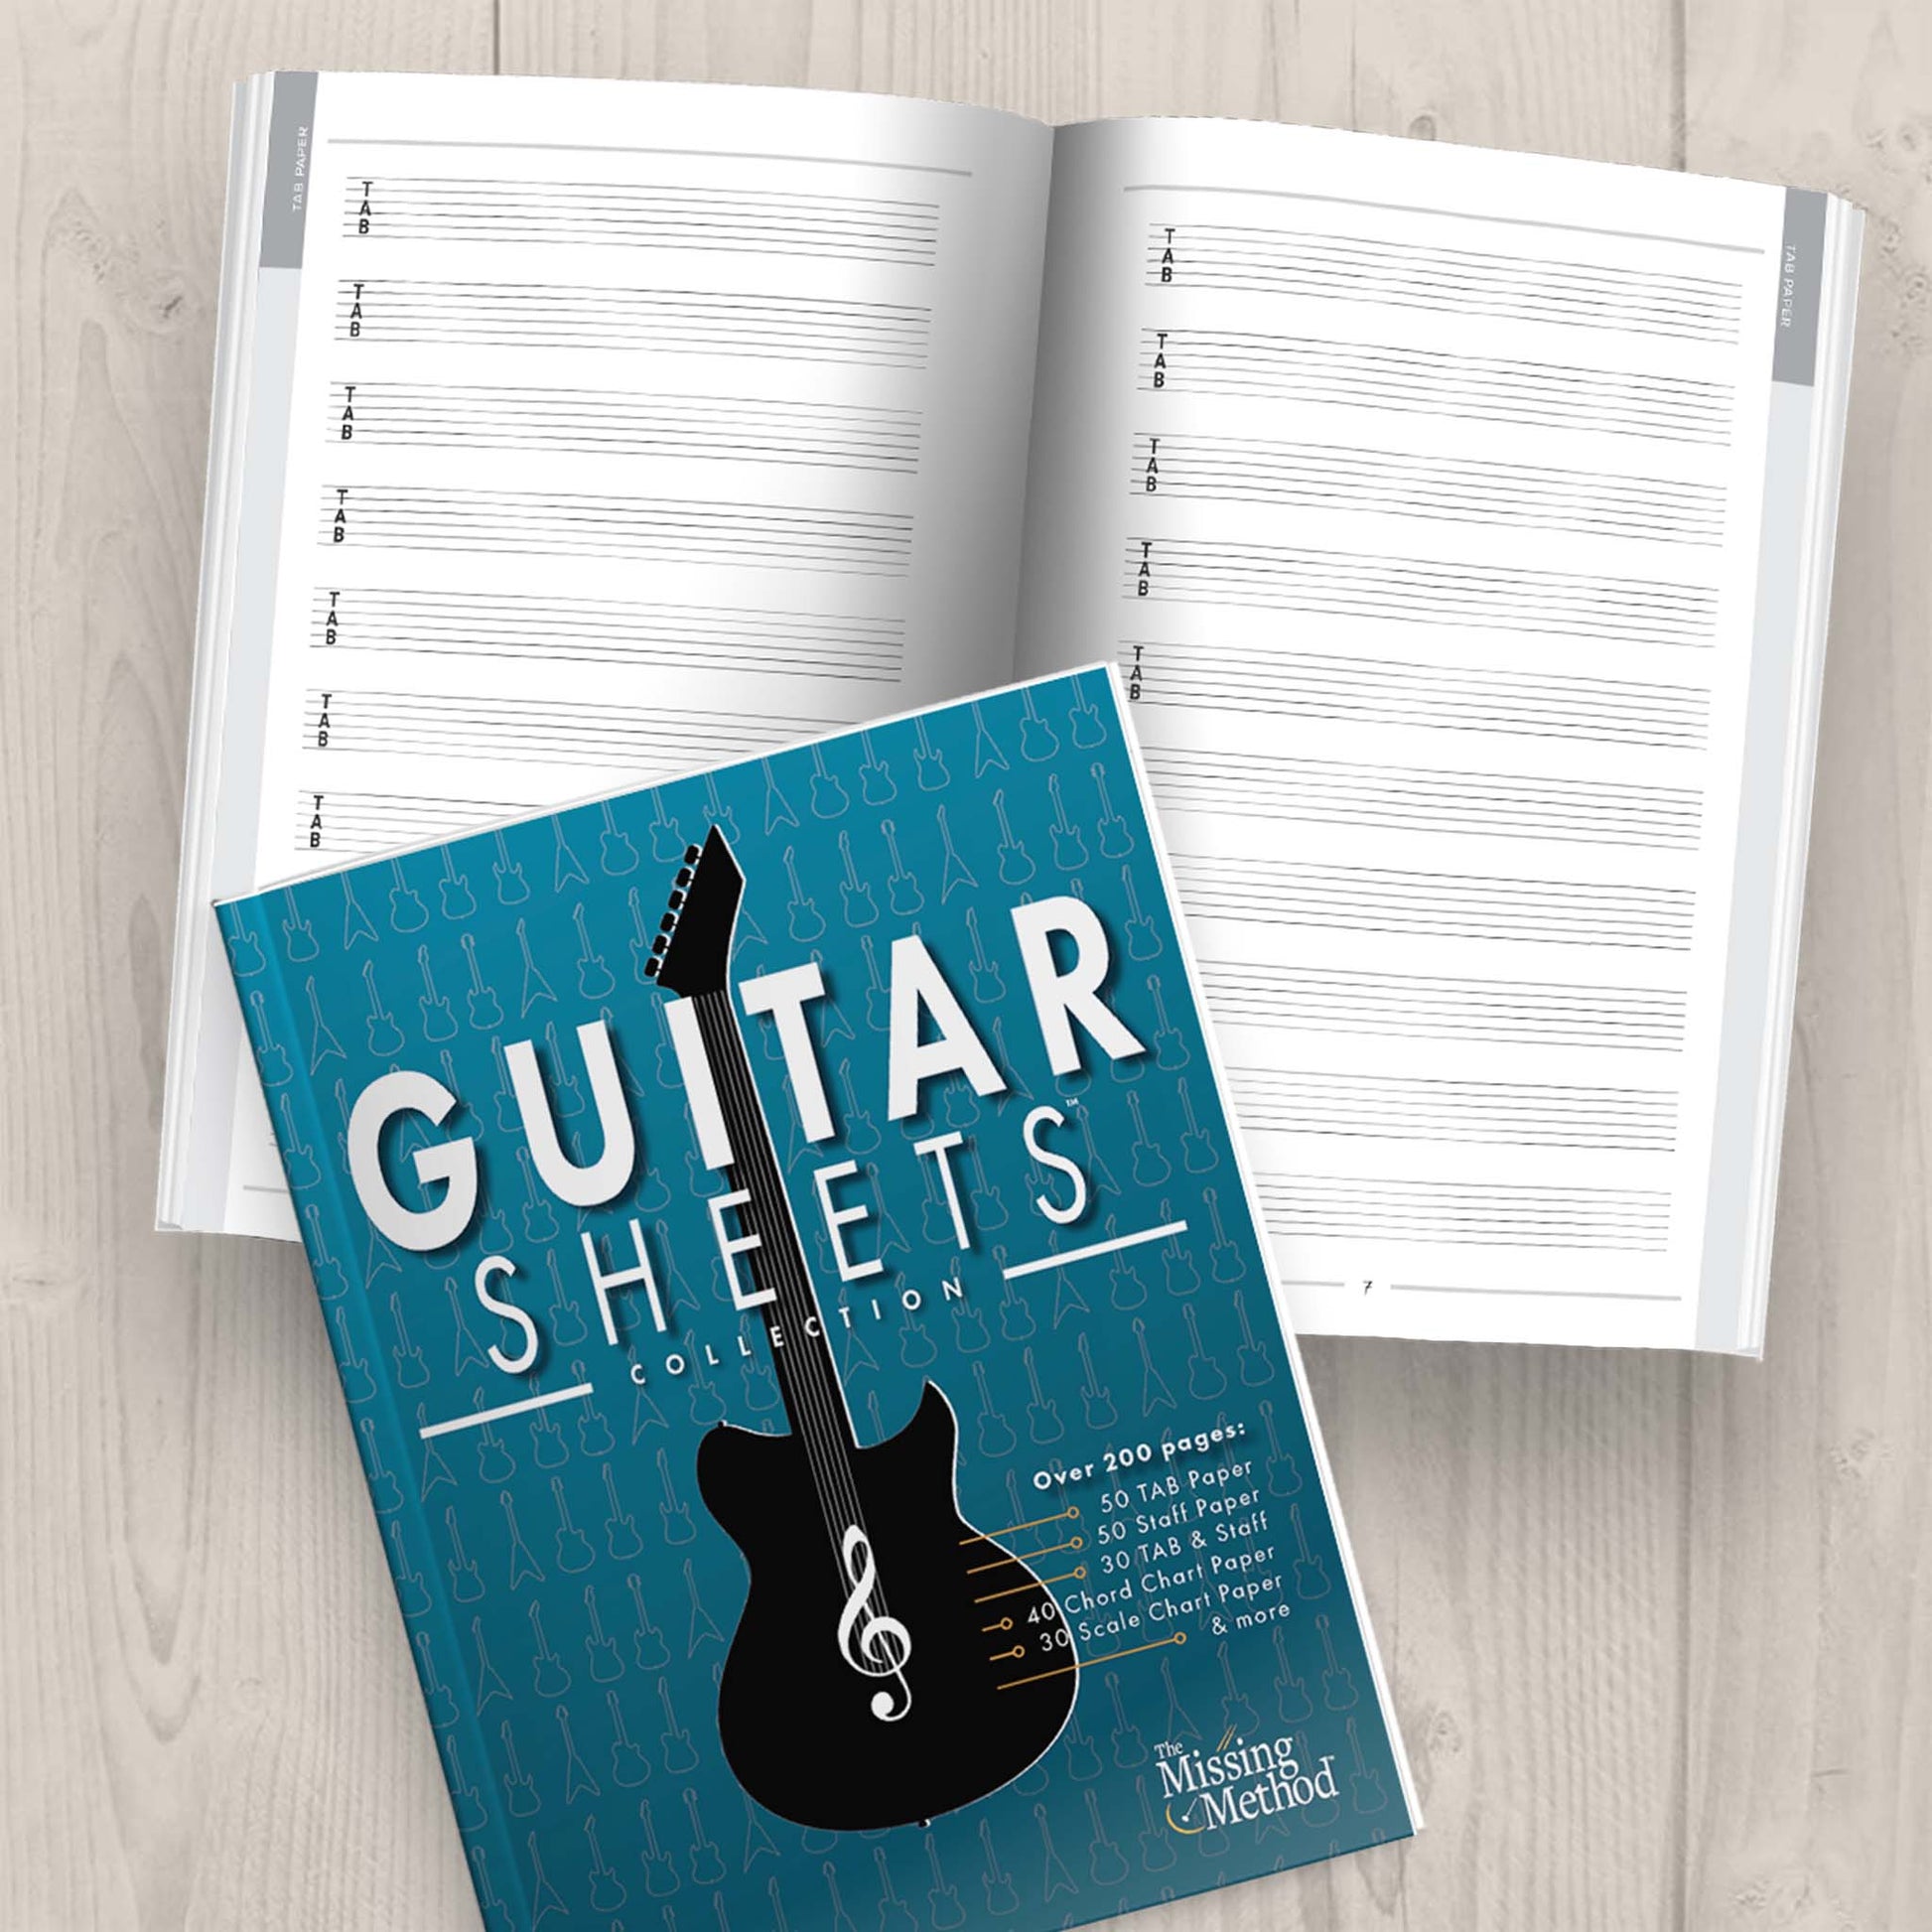 Guitar Sheets Collection Book from The Missing Method for Guitar. Front cover displayed plus open book displaying pages 6-7 of blank tablatuare paper.